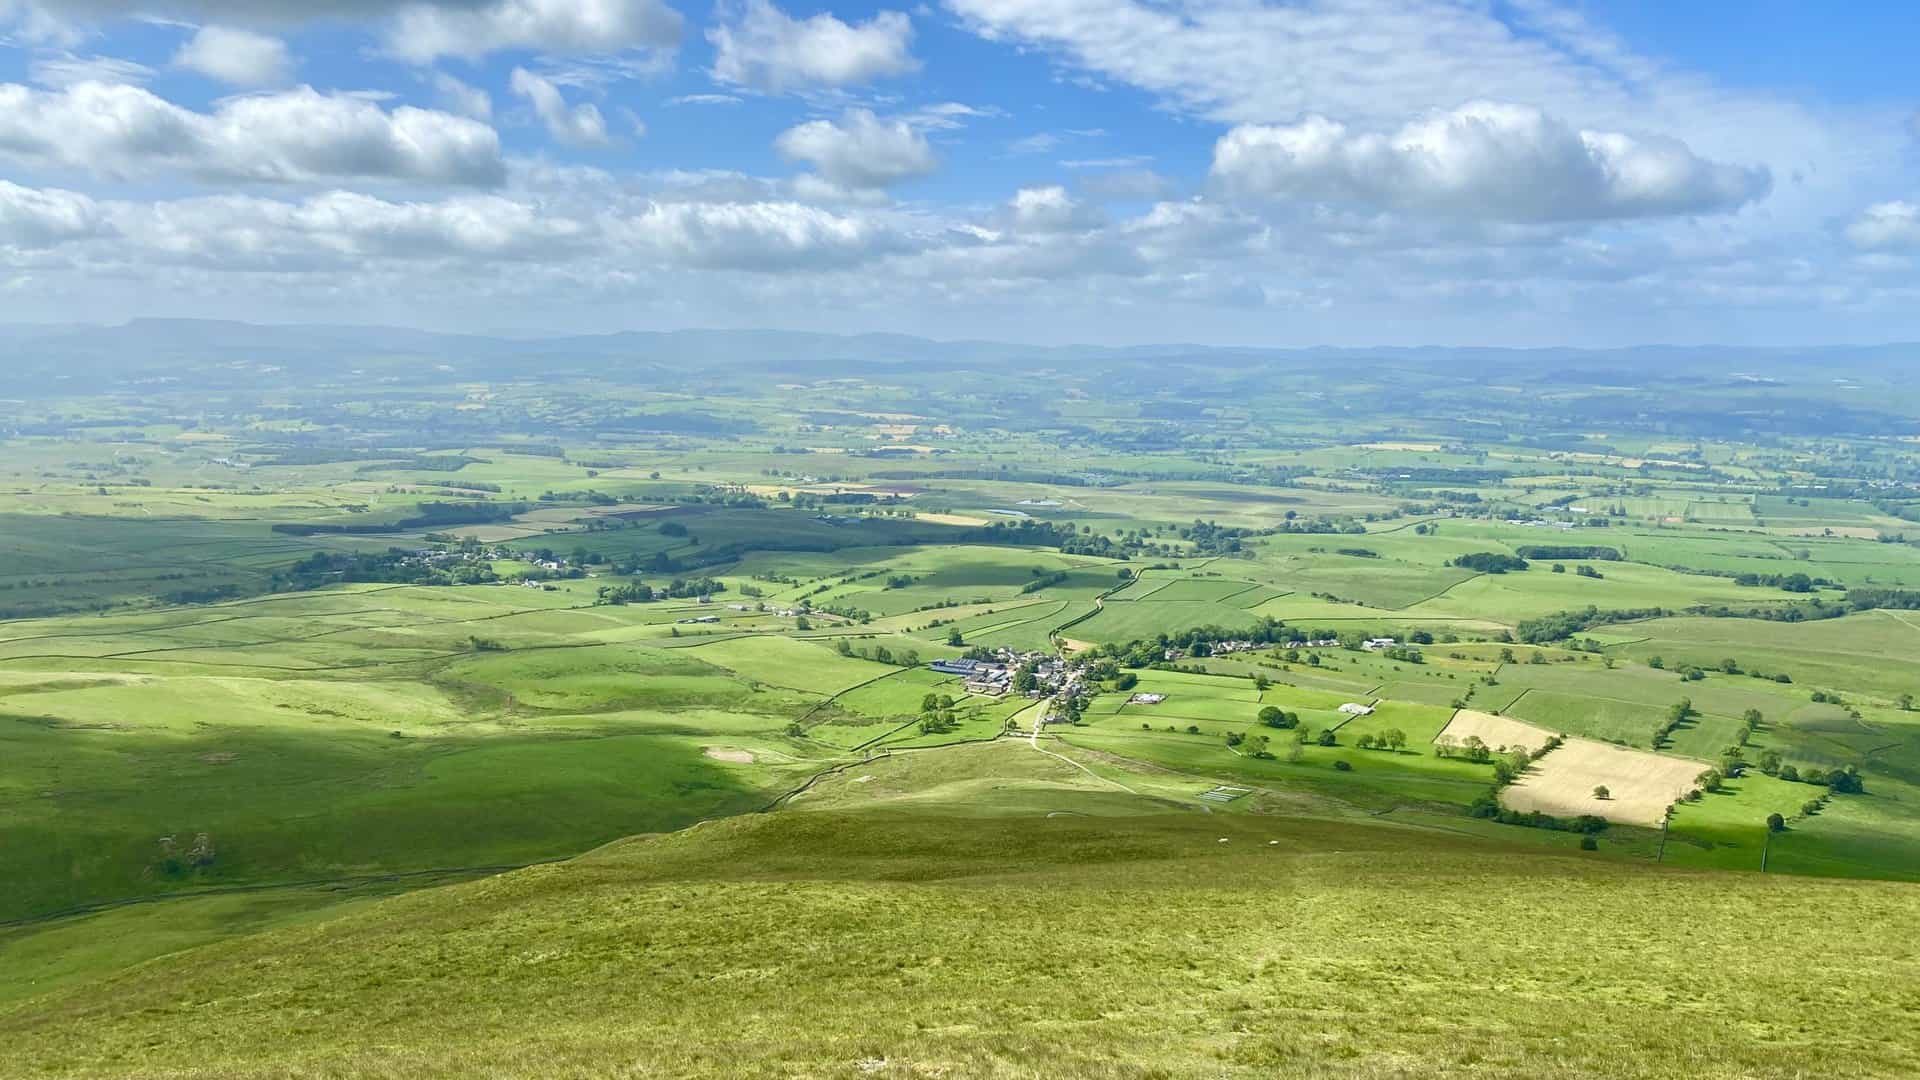 Murton Pike is cone-shaped and from its summit there are excellent 360-degree views of the surrounding landscape.